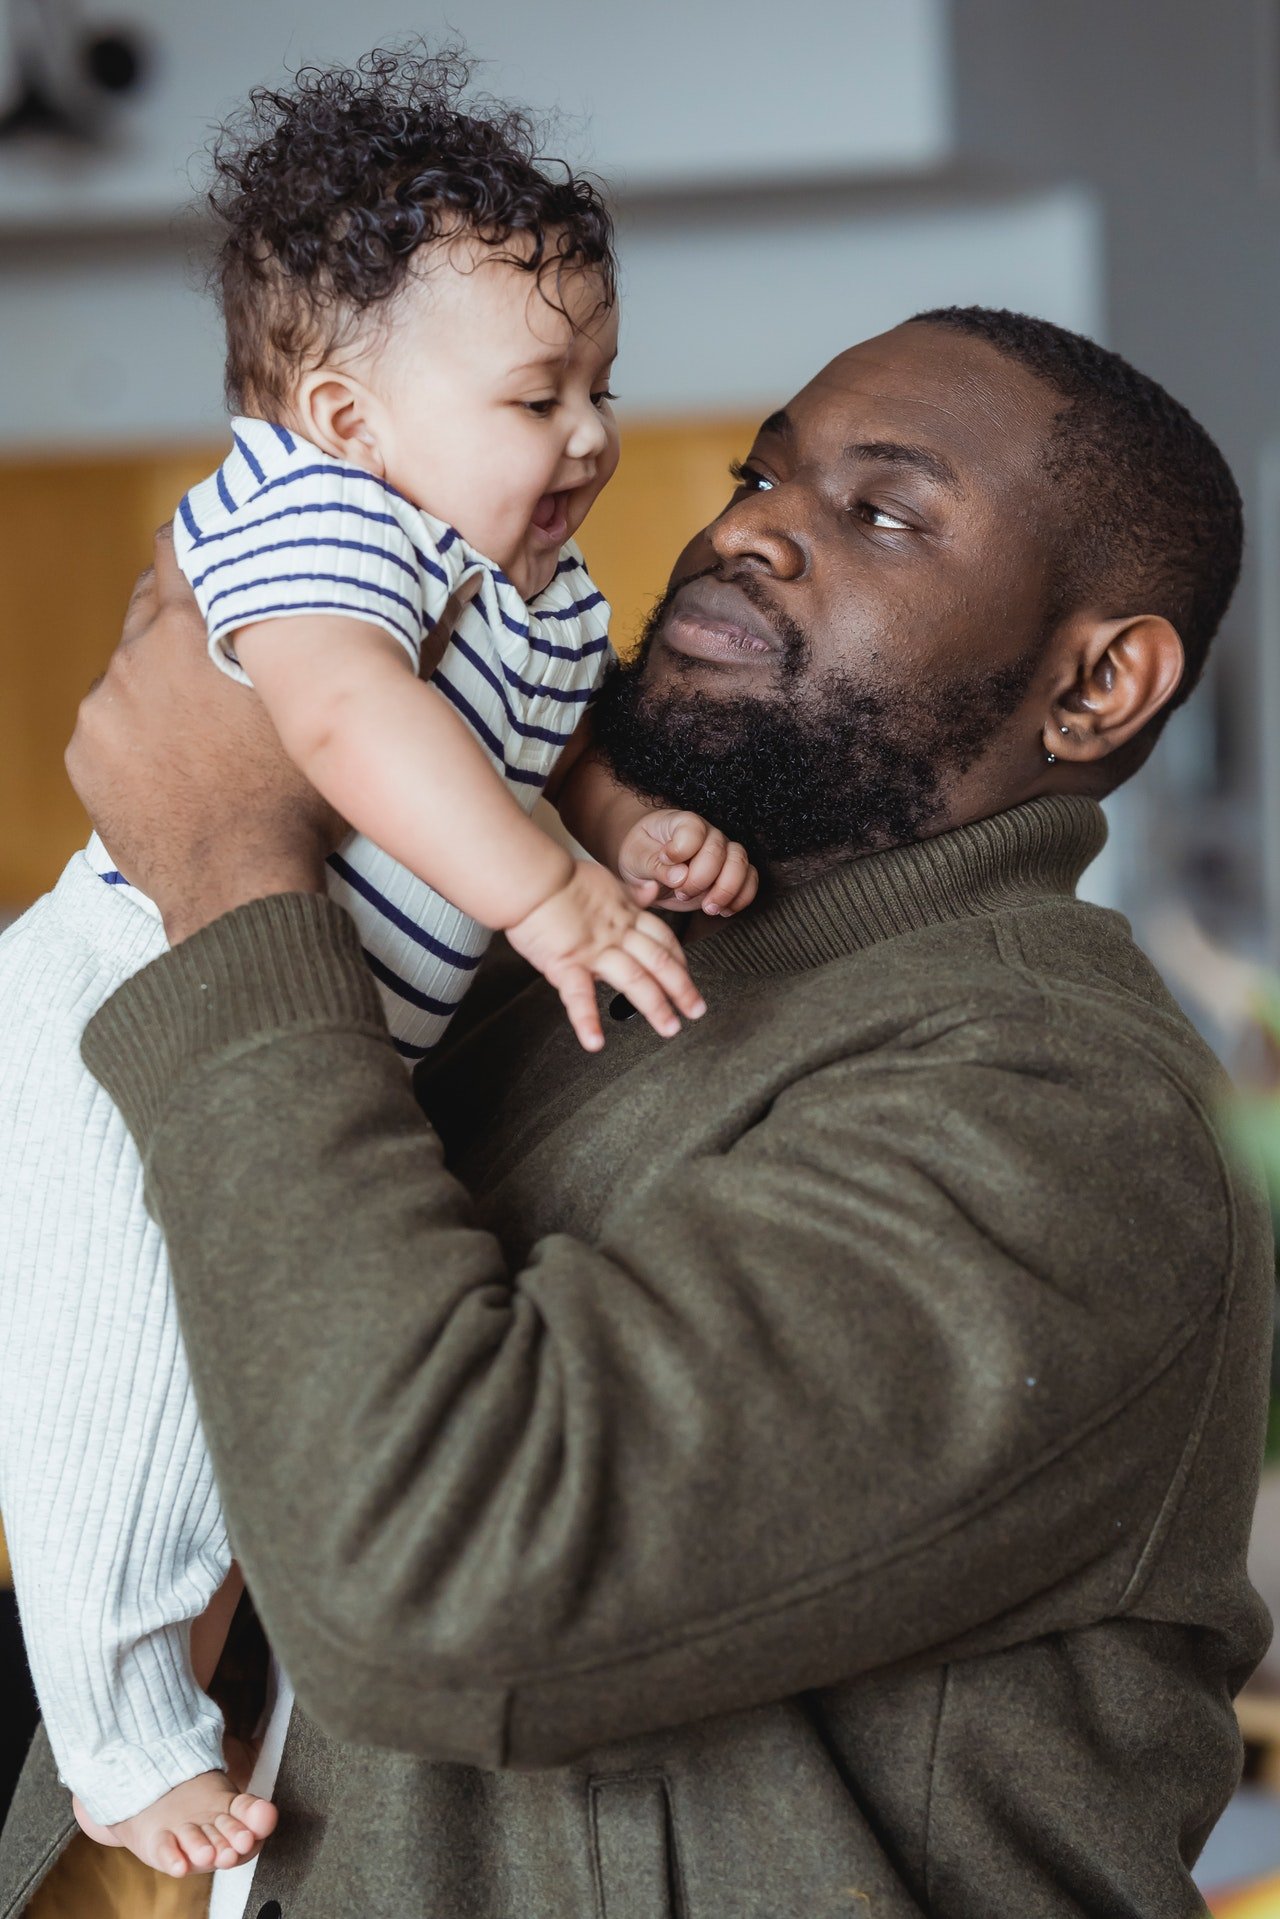 Dad holding his baby | Source: Pexels